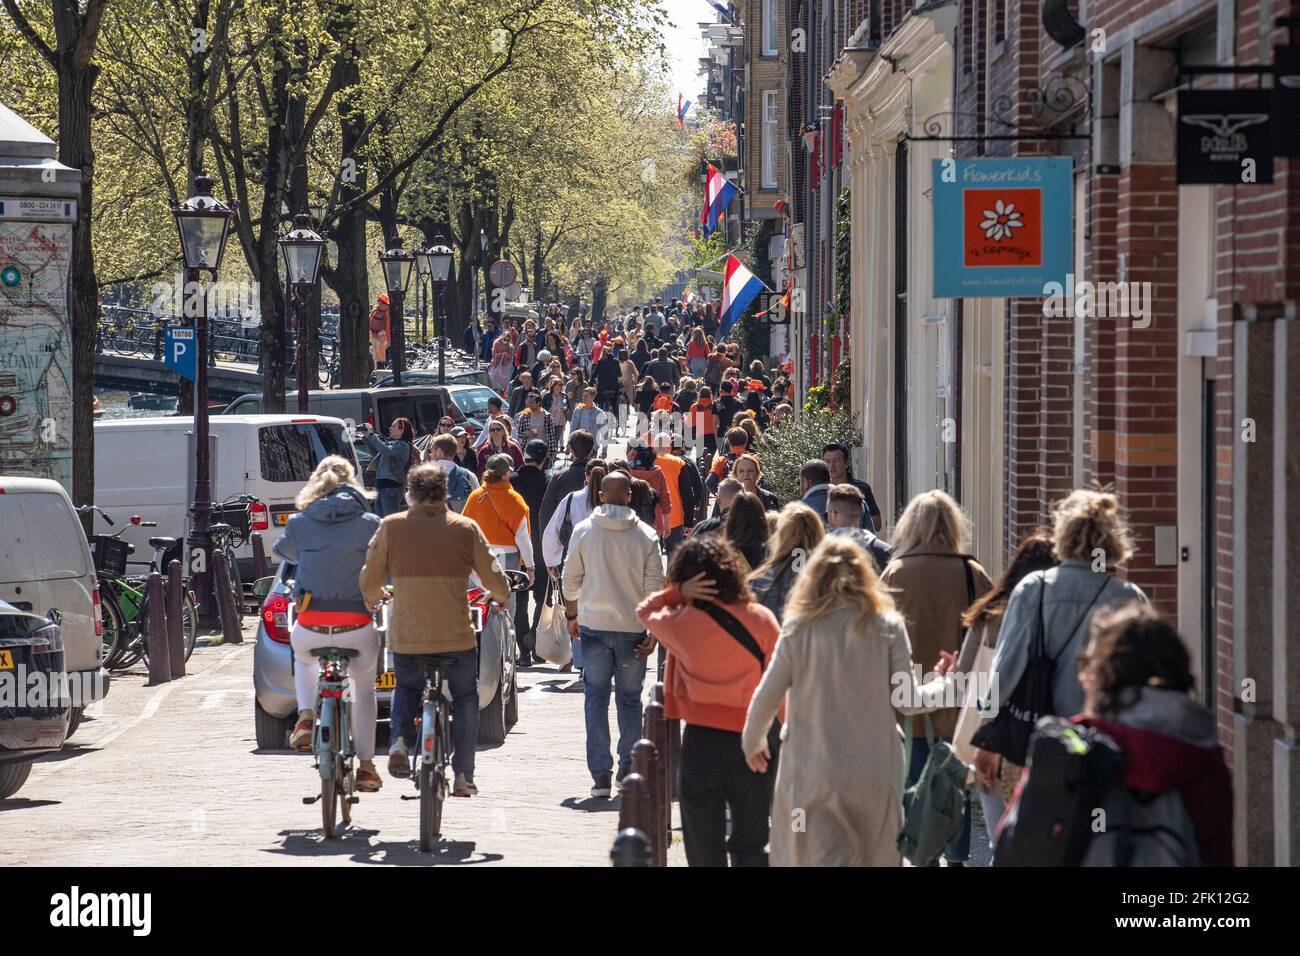 AMSTERDAM, NETHERLANDS - APRIL 27: Crowds of revelers are seen during King’s Day 2021 (Koningsdag) on April 27, 2021 in Amsterdam, Netherlands. Due to the coronavirus pandemic, this year’s official celebrations have all been cancelled just like last year. Still, many revelers went out on the streets of Amsterdam and other cities around the country. (Photo by Niels Wenstedt/BSR Agency/Alamy Live News) Stock Photo